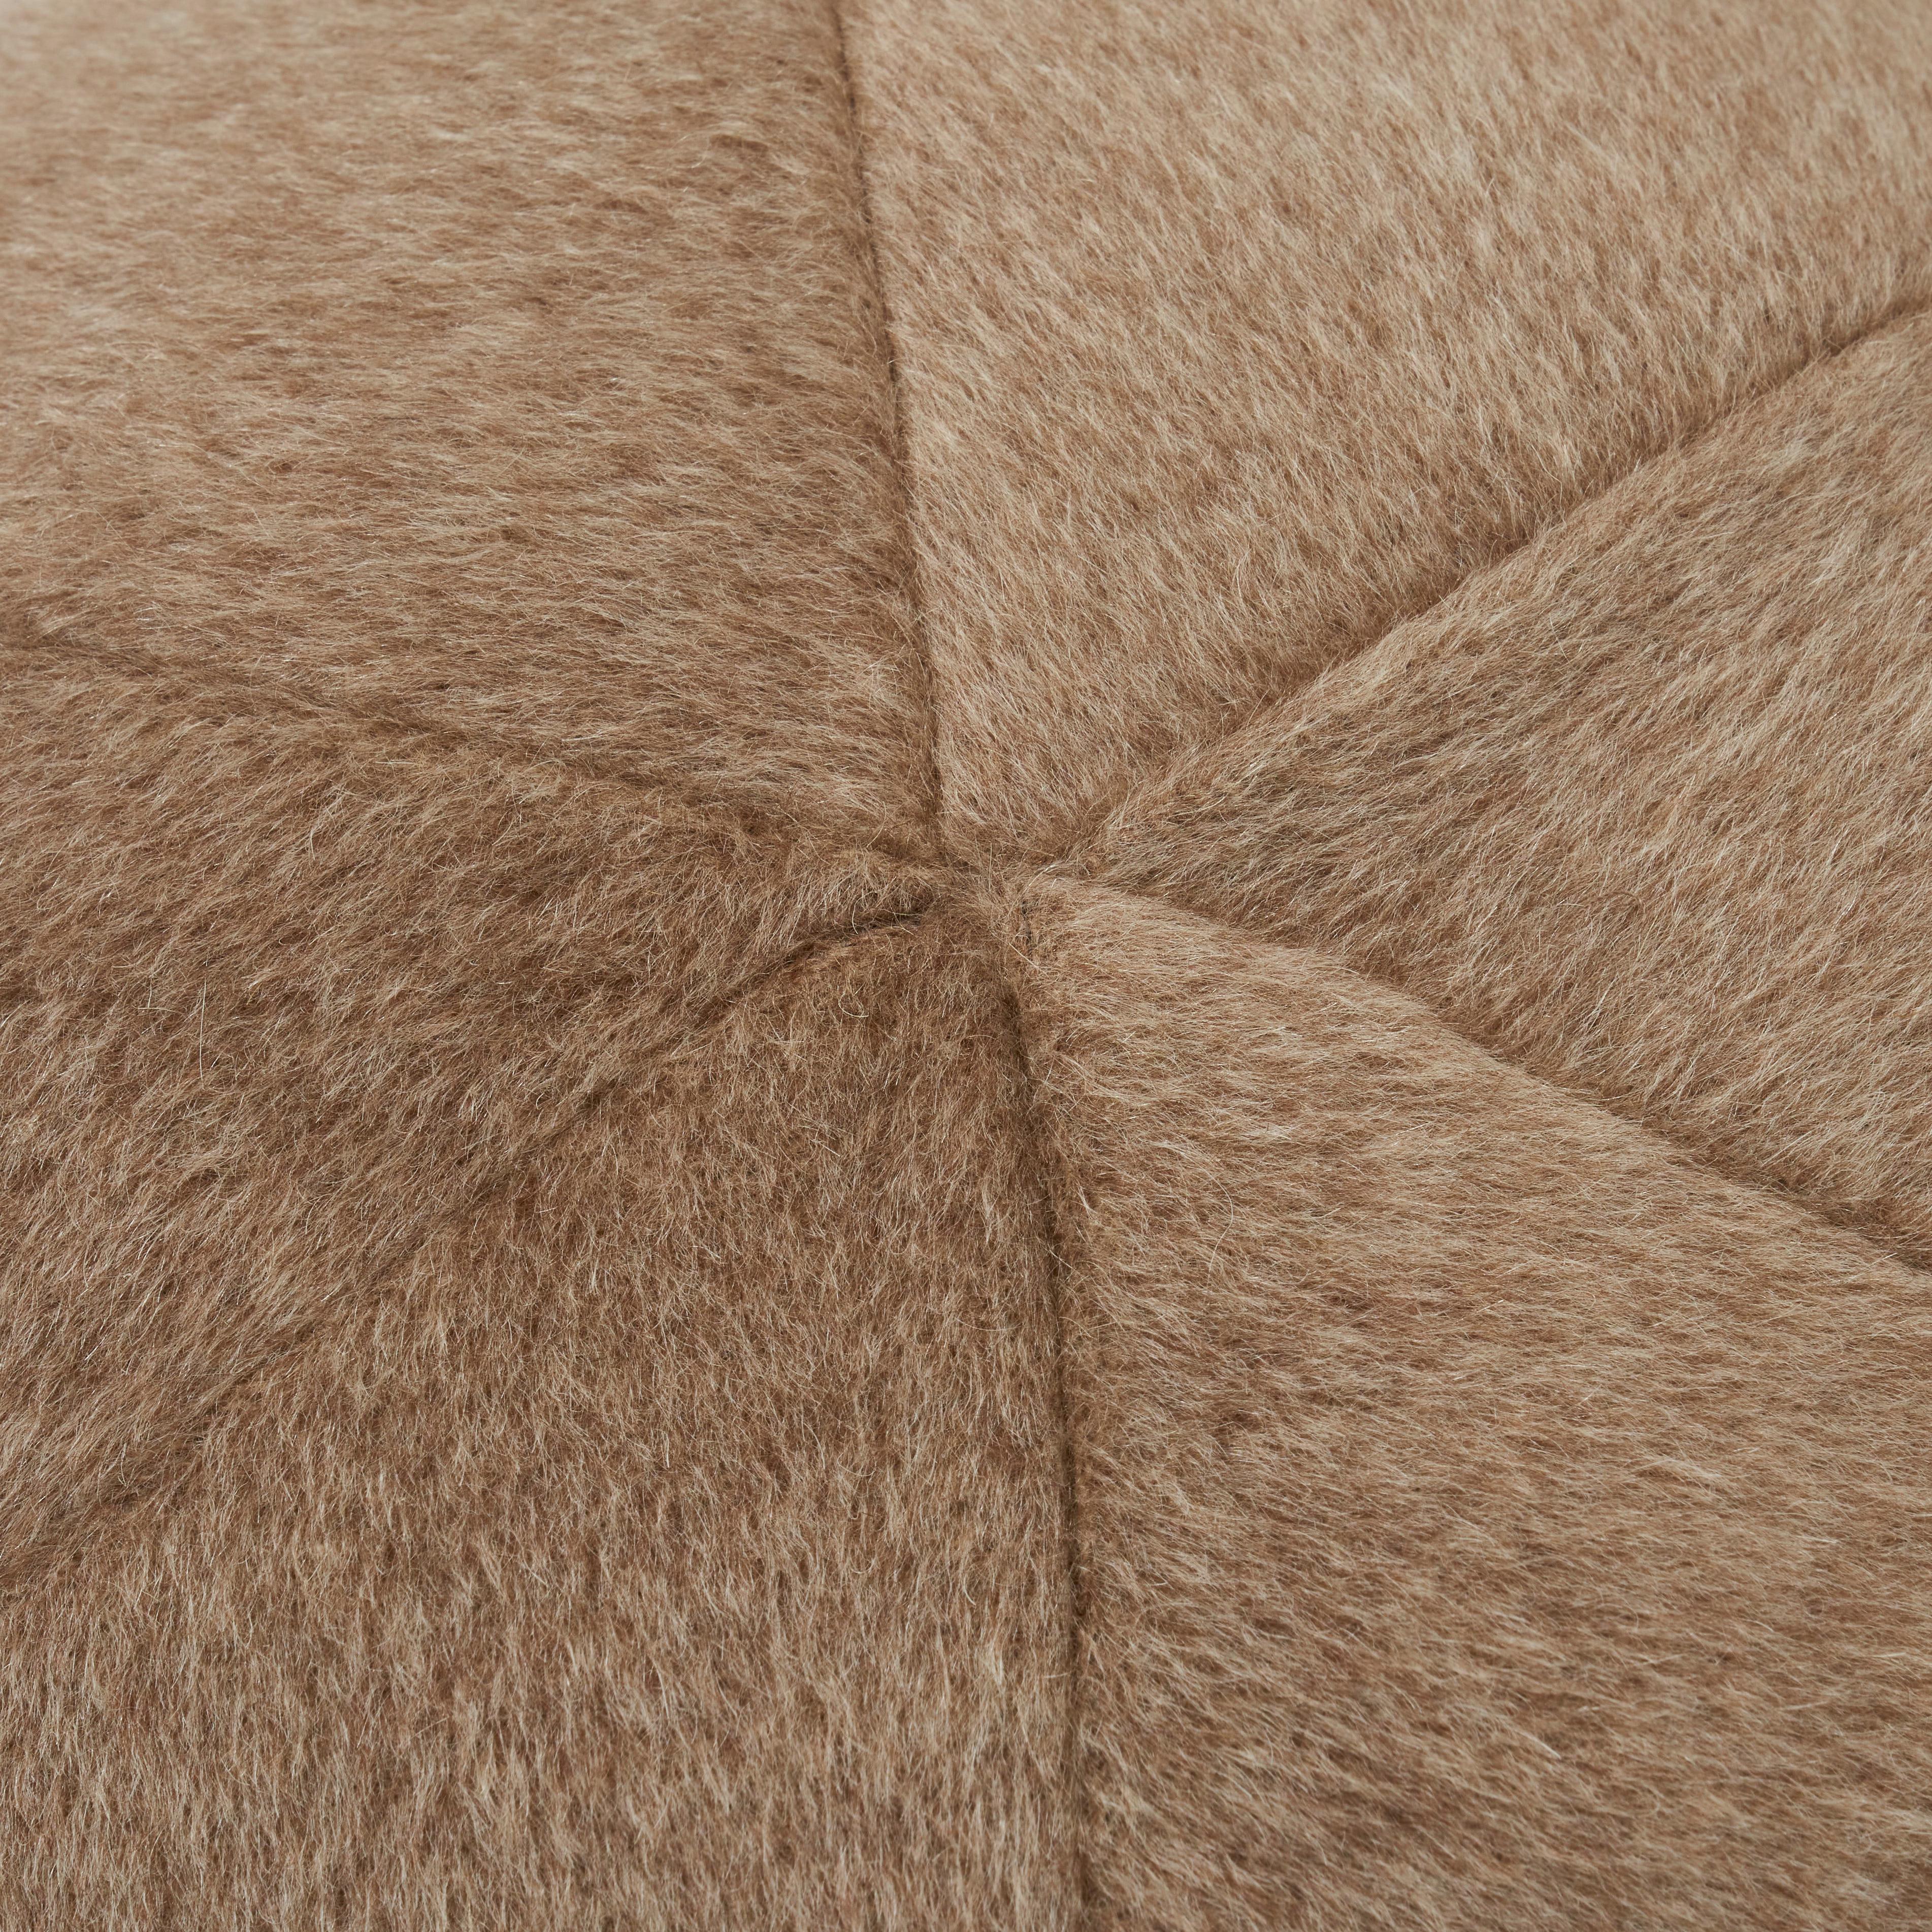 This pillow features Dixon Mohair Weave with a knife edge finish. With a brushed and felted finish, this mohair weave has a plush texture and exceptionally soft hand. It's luxurious yet highly resilient and comes in an earthy, neutral palette.